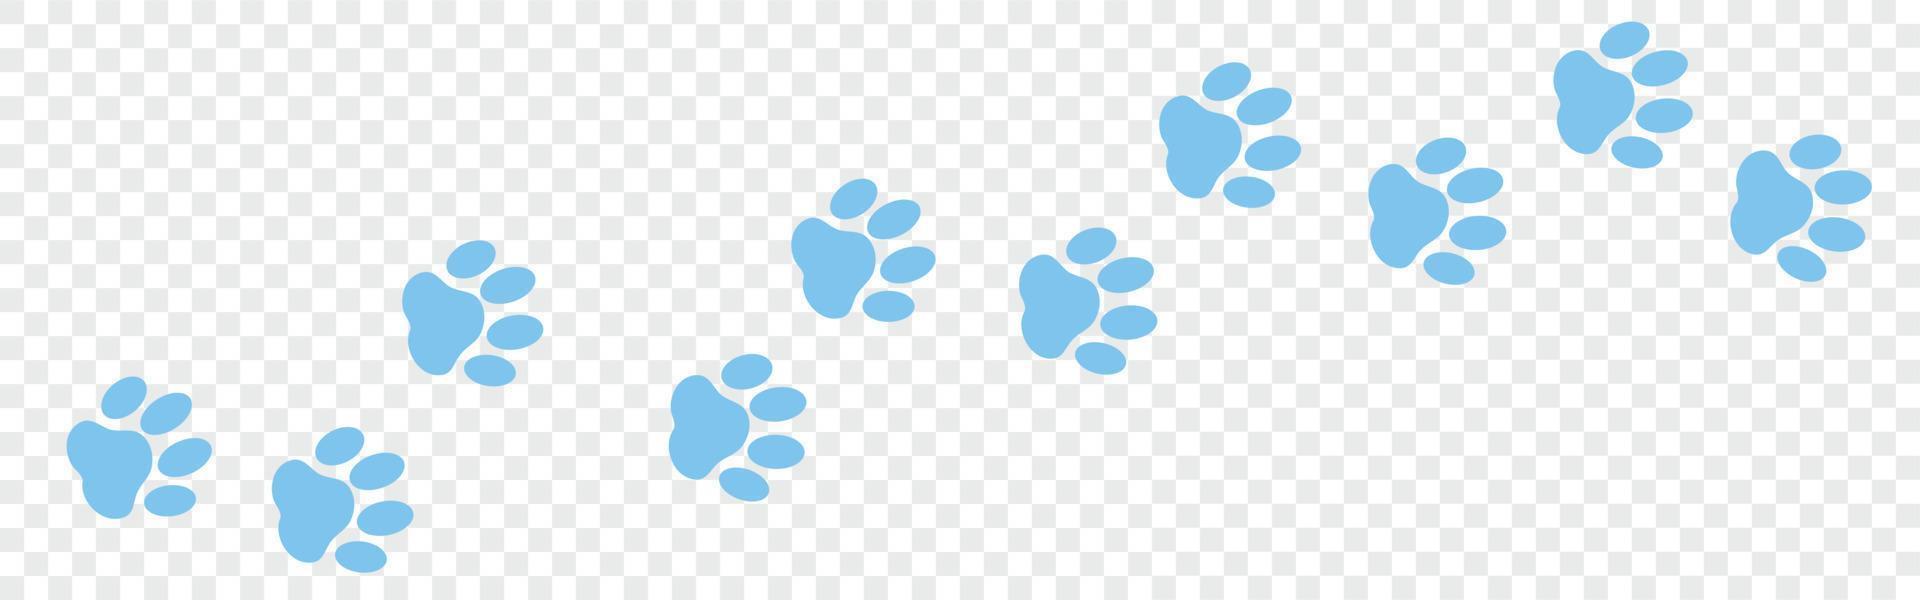 Blue Paw print icon isolated seamless pattern on transparent background. Dog or cat paw print. Animal track. Vector Illustration